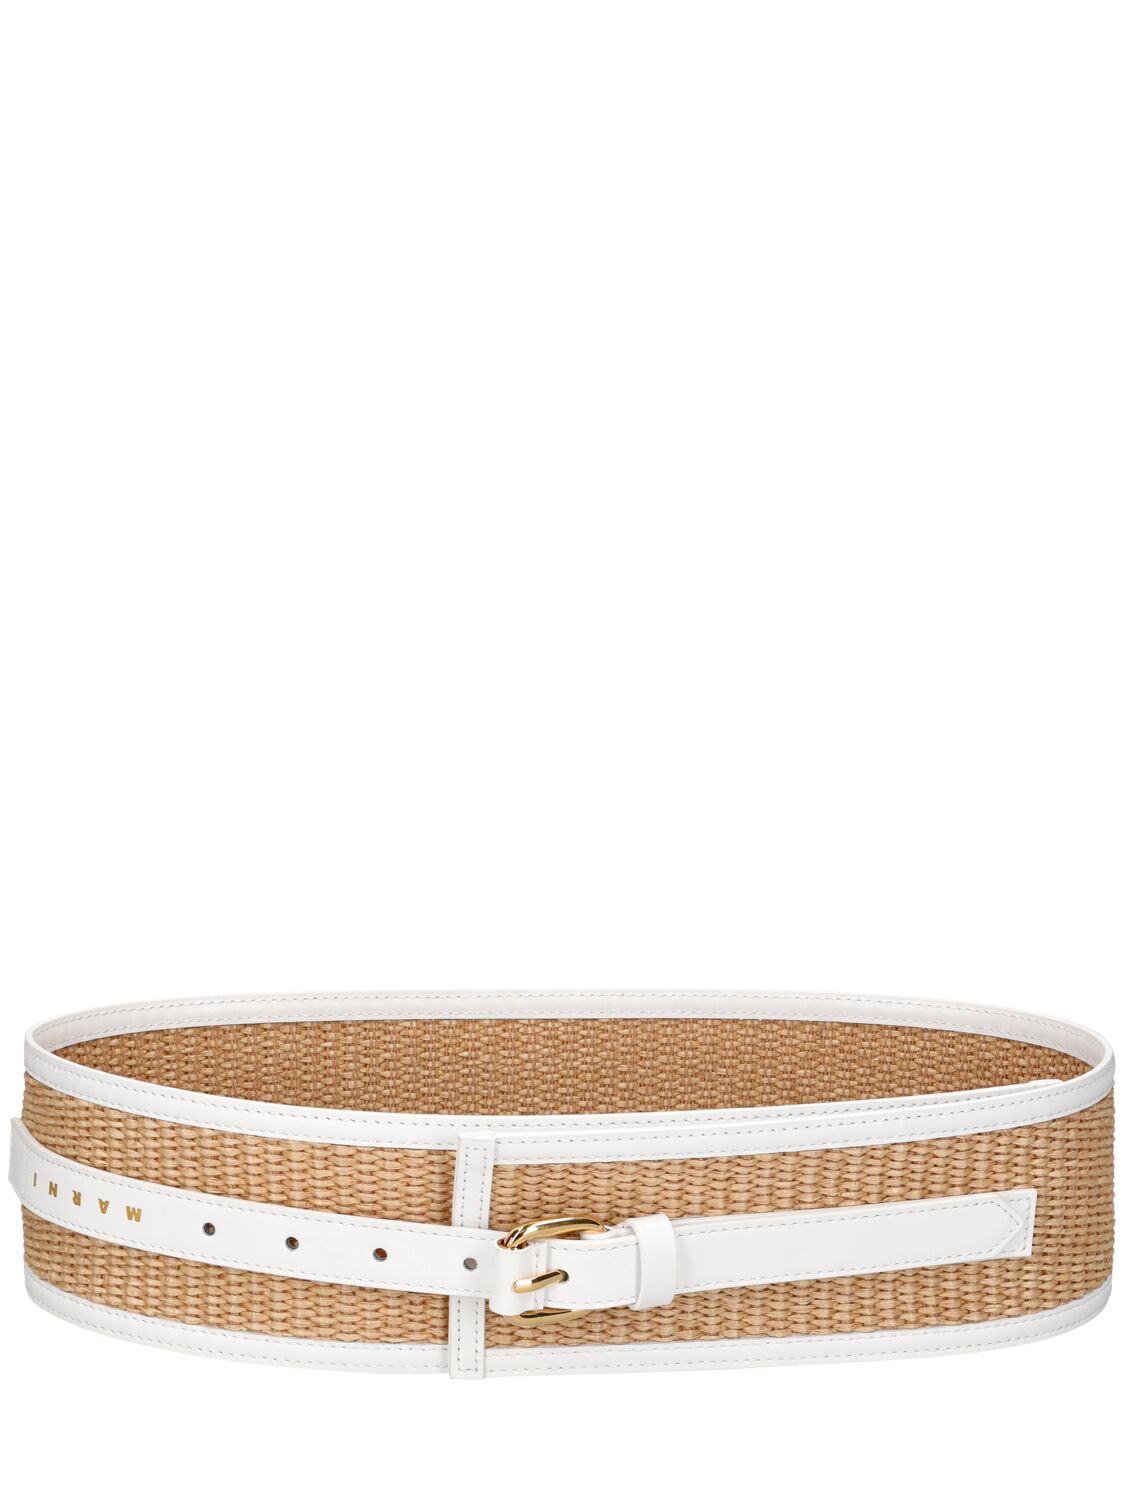 Marni Woven Raffia Effect & Leather Waist Belt In Sand Storm,lily